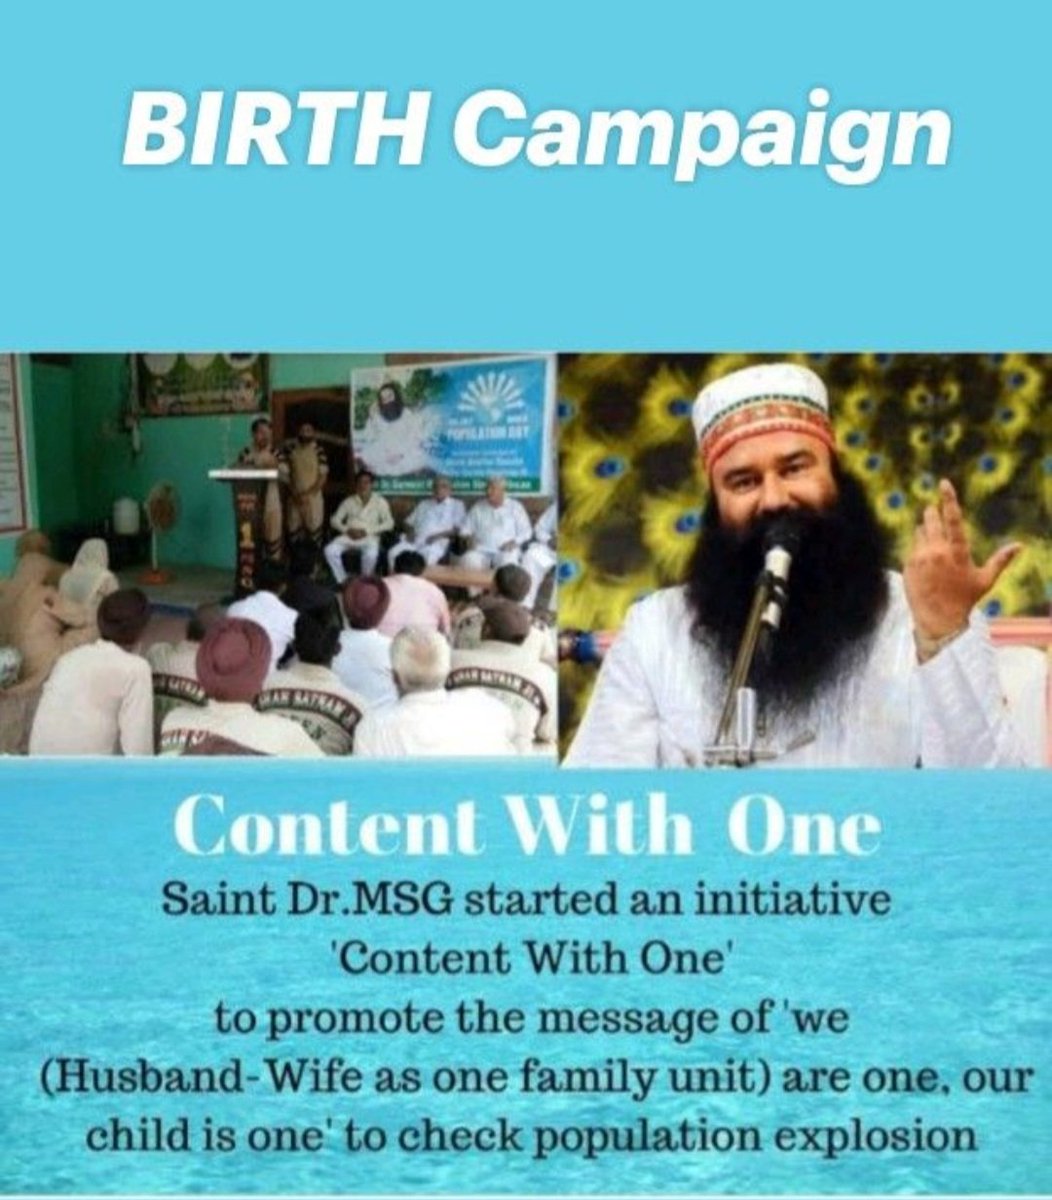 Population explosion is a huge problem for the nation. Saint Ram Rahim Ji Started BIRTH Campaign under which Guruji urges people to #ContentWithOne .👍